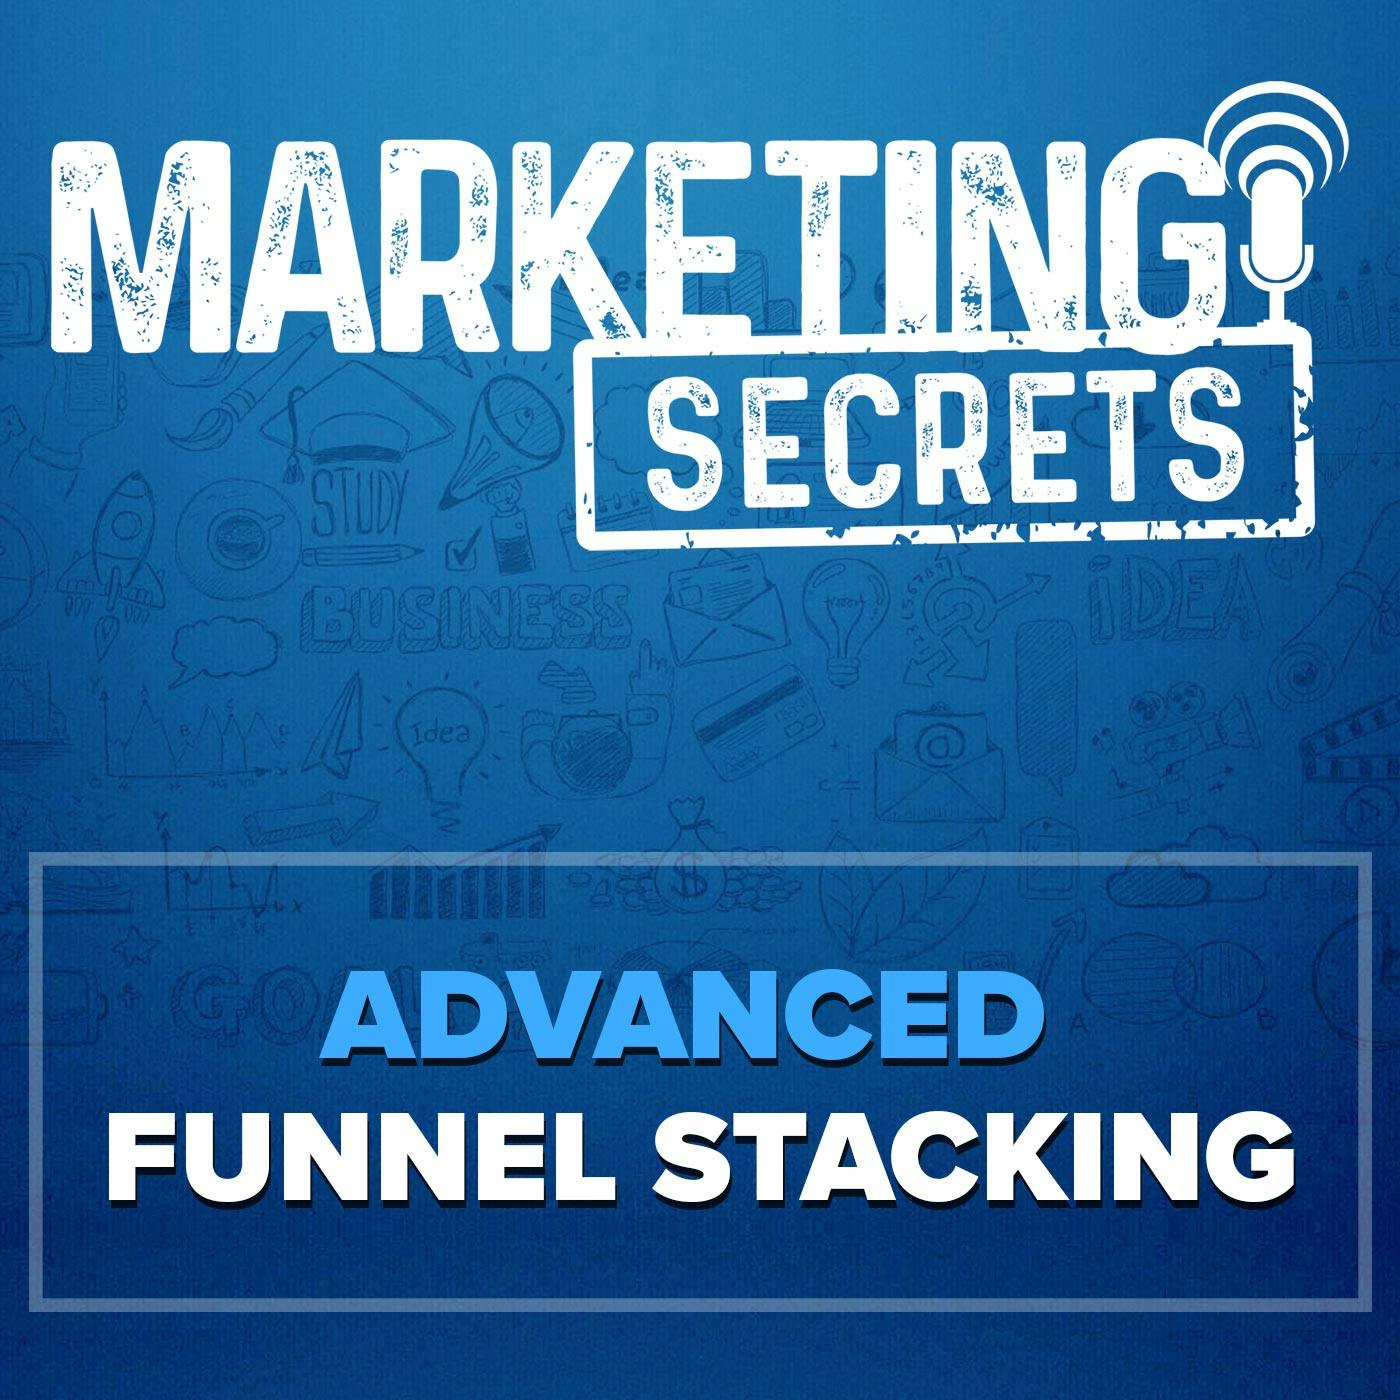 Advanced Funnel Stacking